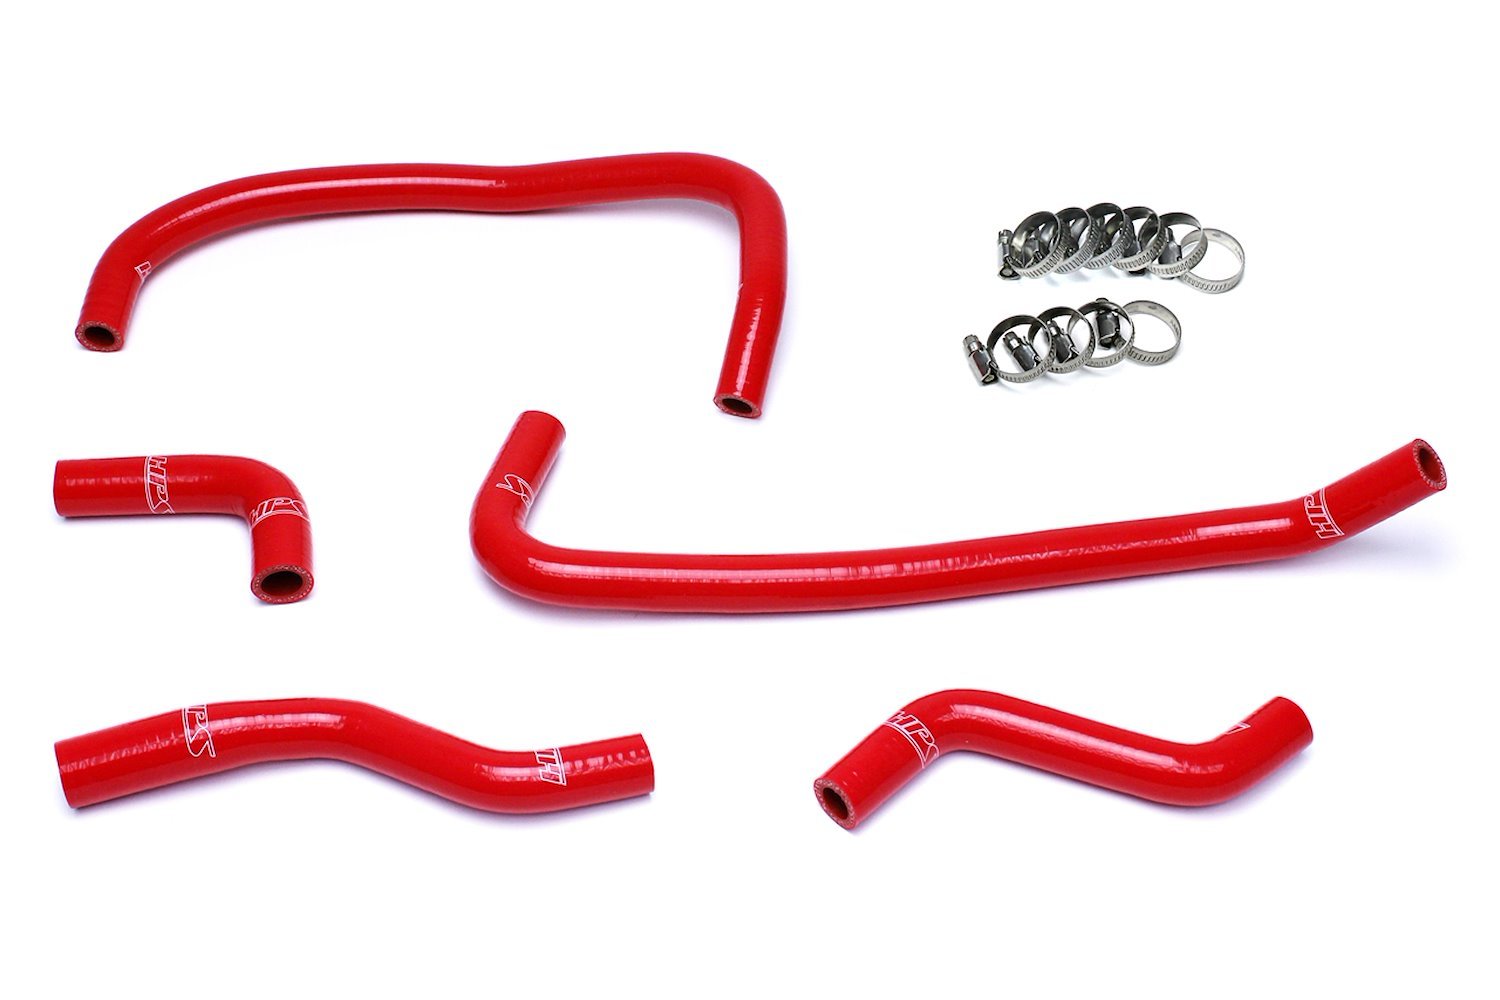 57-1503H-RED Heater Hose Kit, High-Temp 3-Ply Reinforced Silicone, Replace OEM Rubber Heater Coolant Hoses